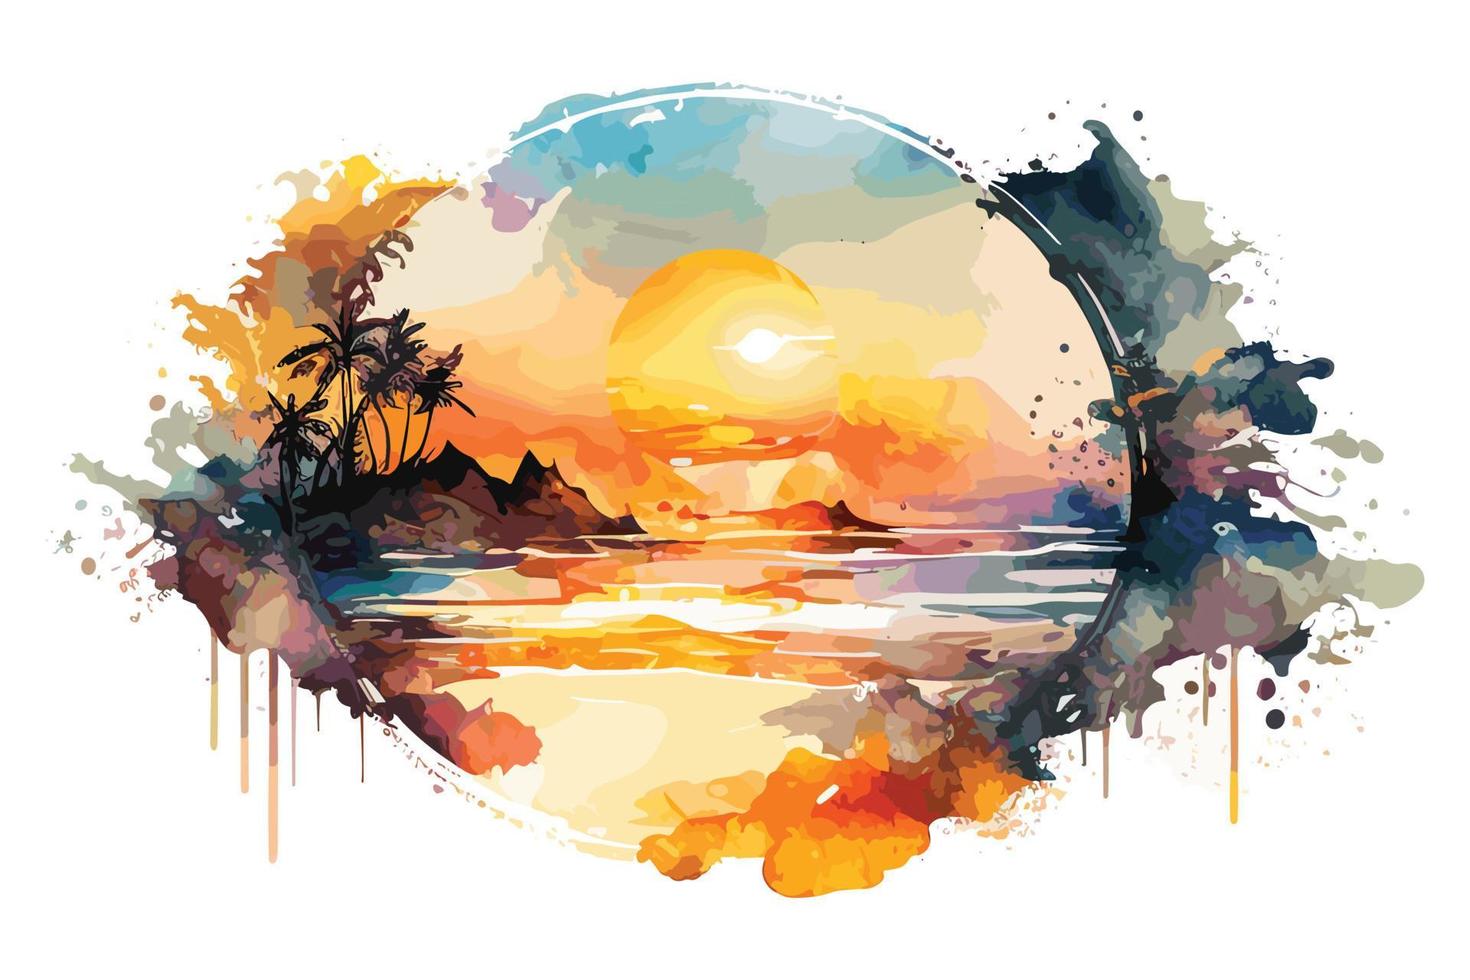 watercolor sunset at the beach illustration for social media ads, posters, banners, and book covers design vector